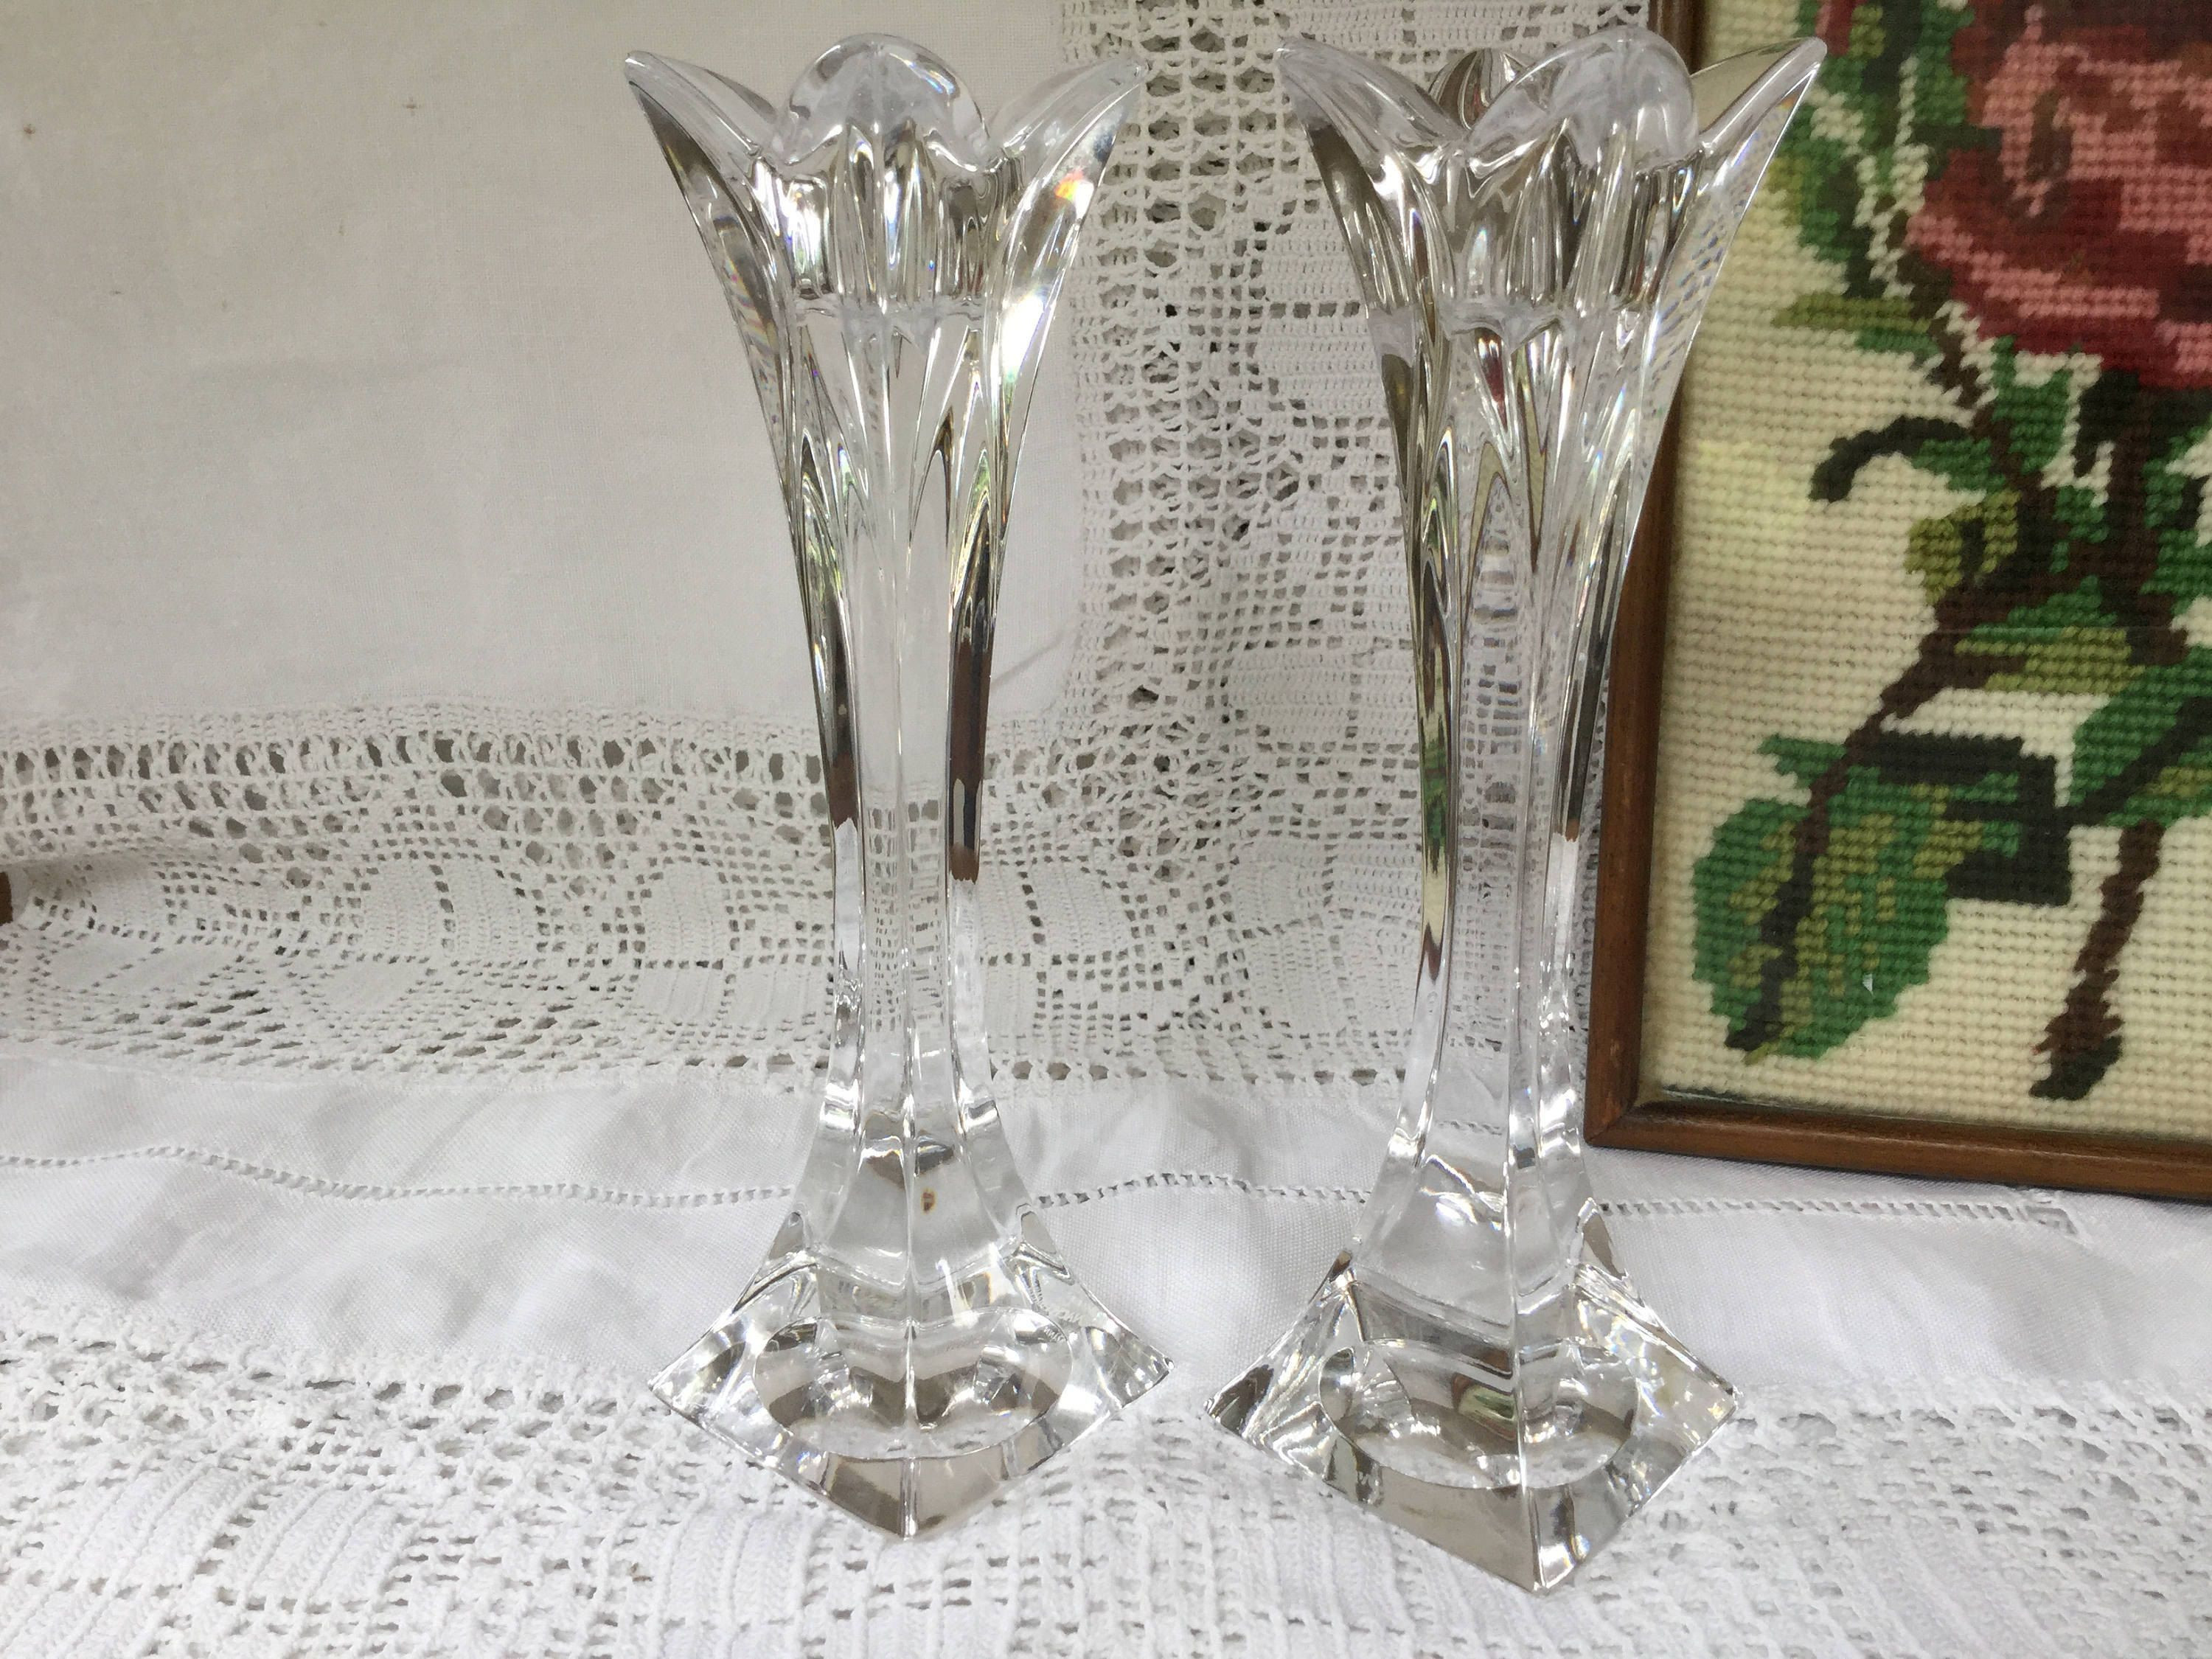 18 Recommended Anchor Hocking Glass Vases 2022 free download anchor hocking glass vases of 48 nachtmann crystal vase the weekly world regarding 48 nachtmann crystal vase